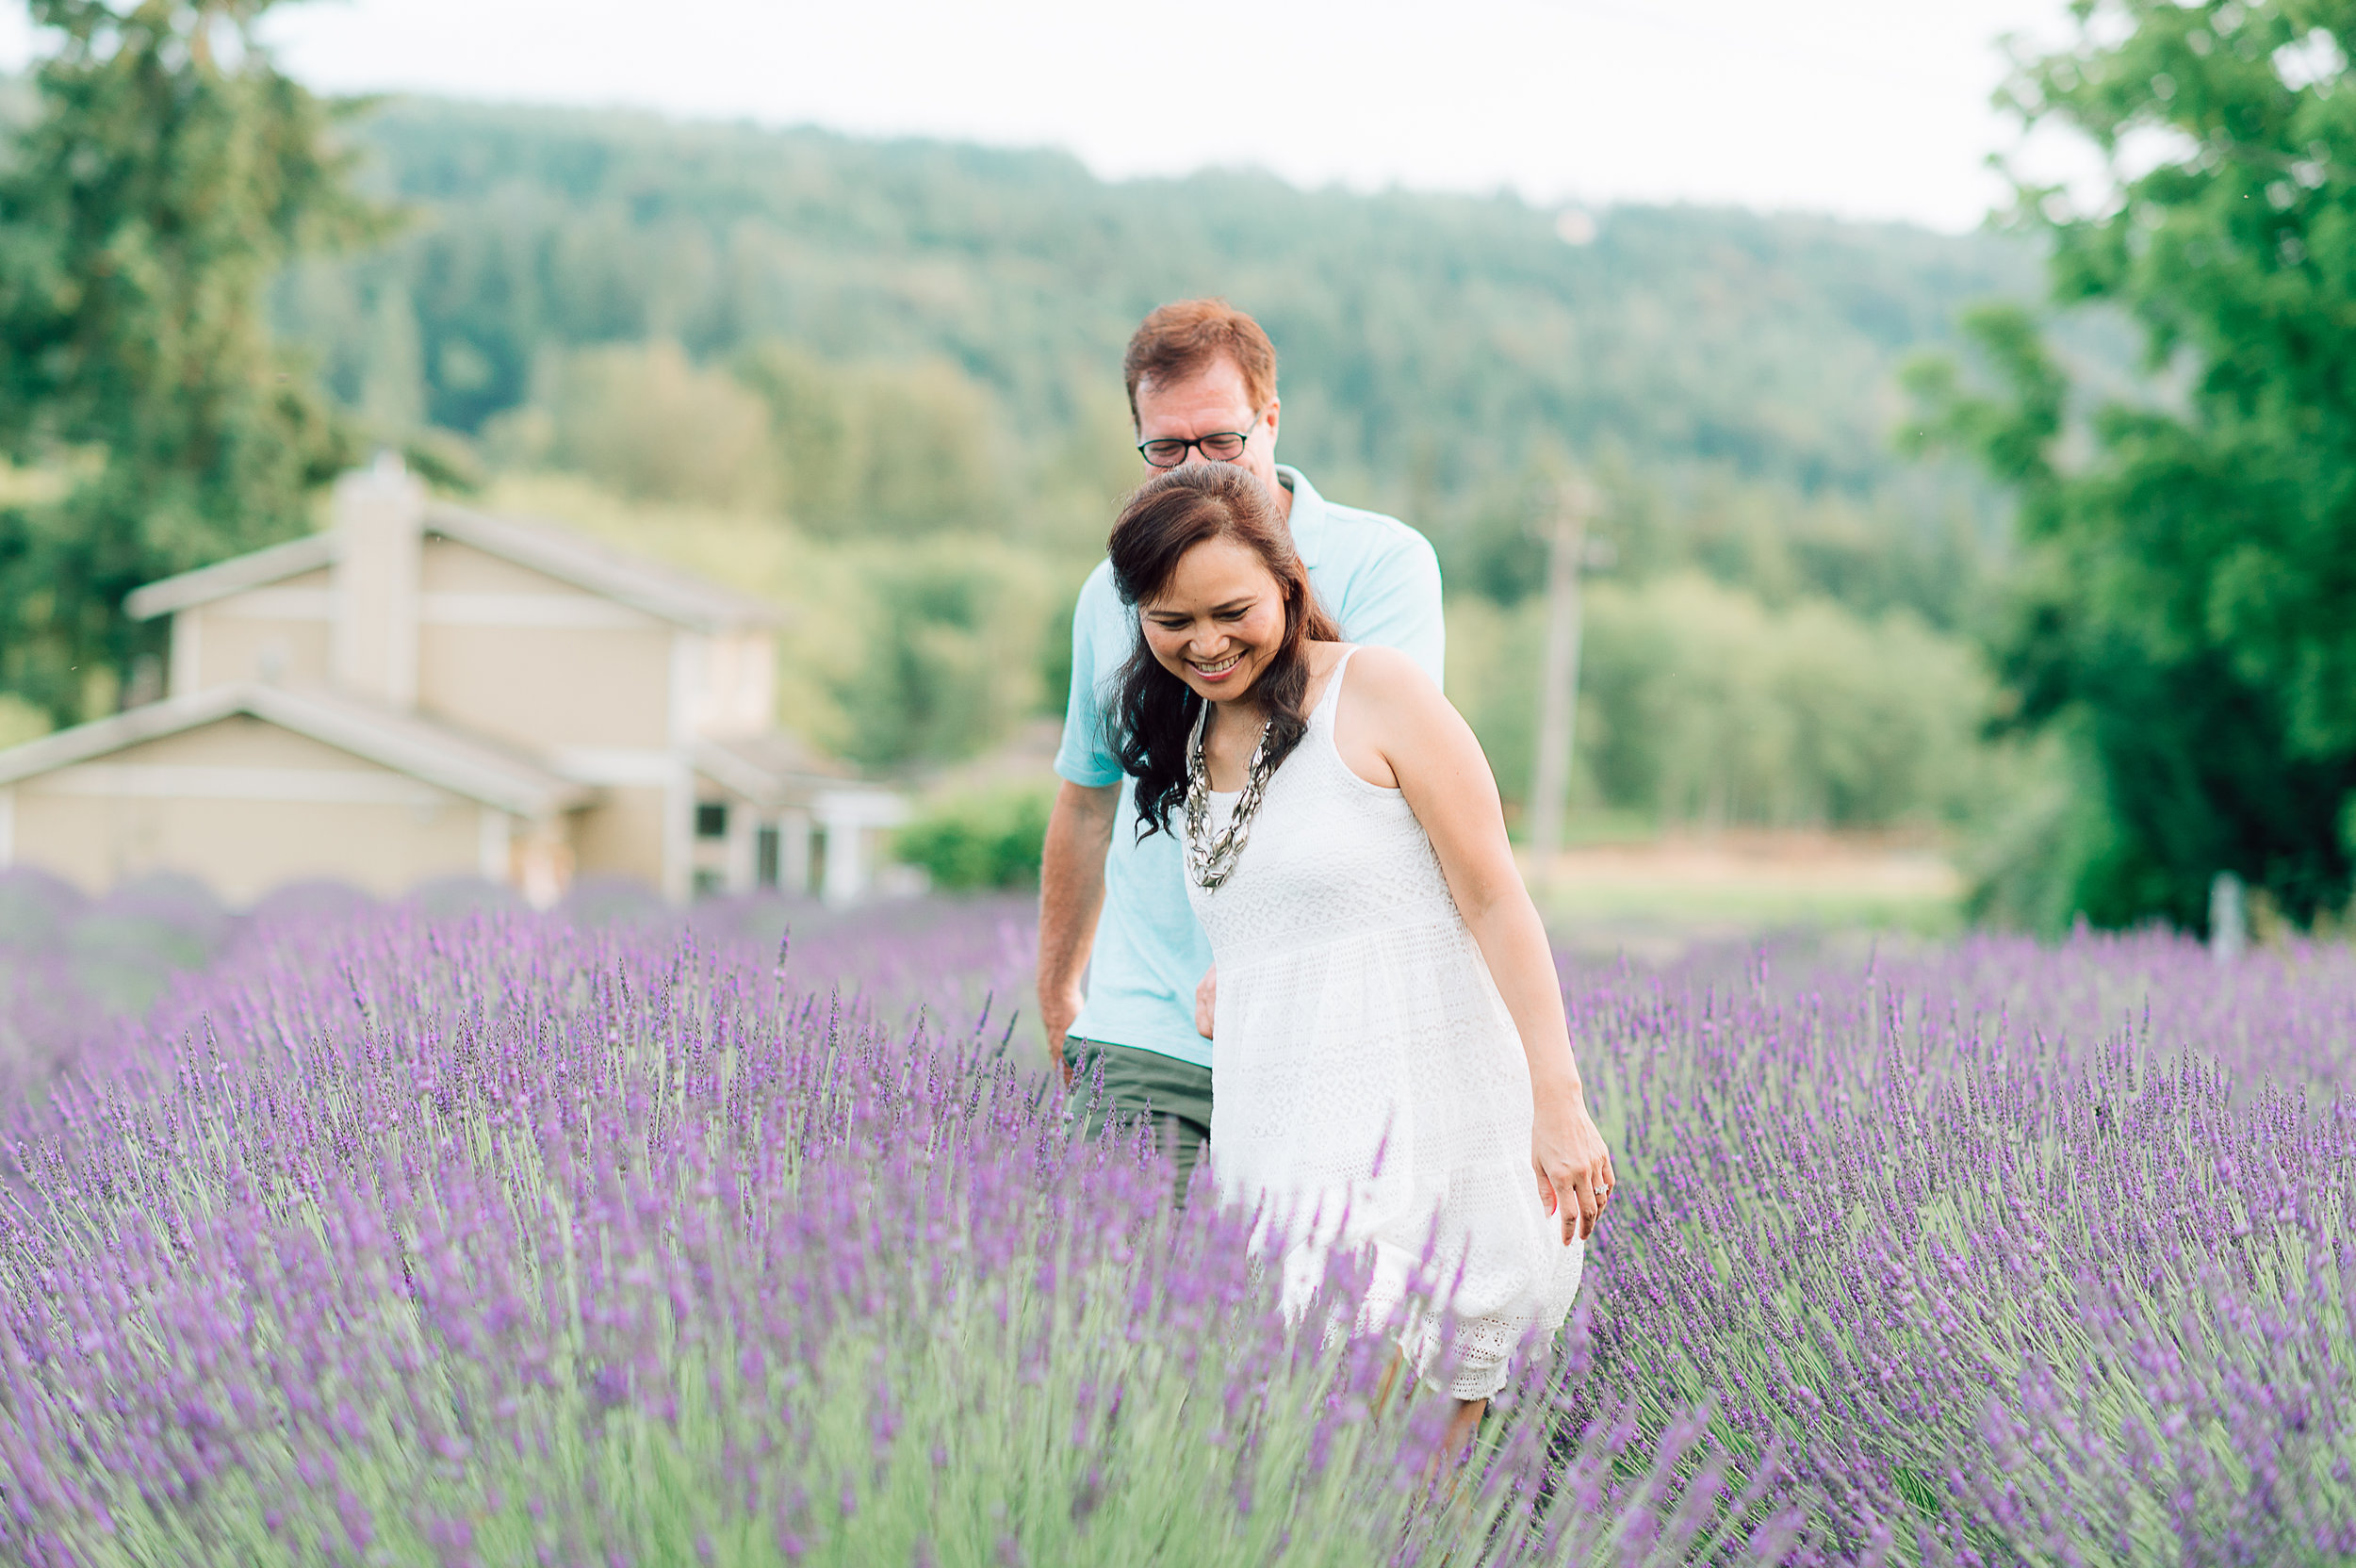 engagement_lavenderfield_youseephotography_LidiaOtto (36).jpg